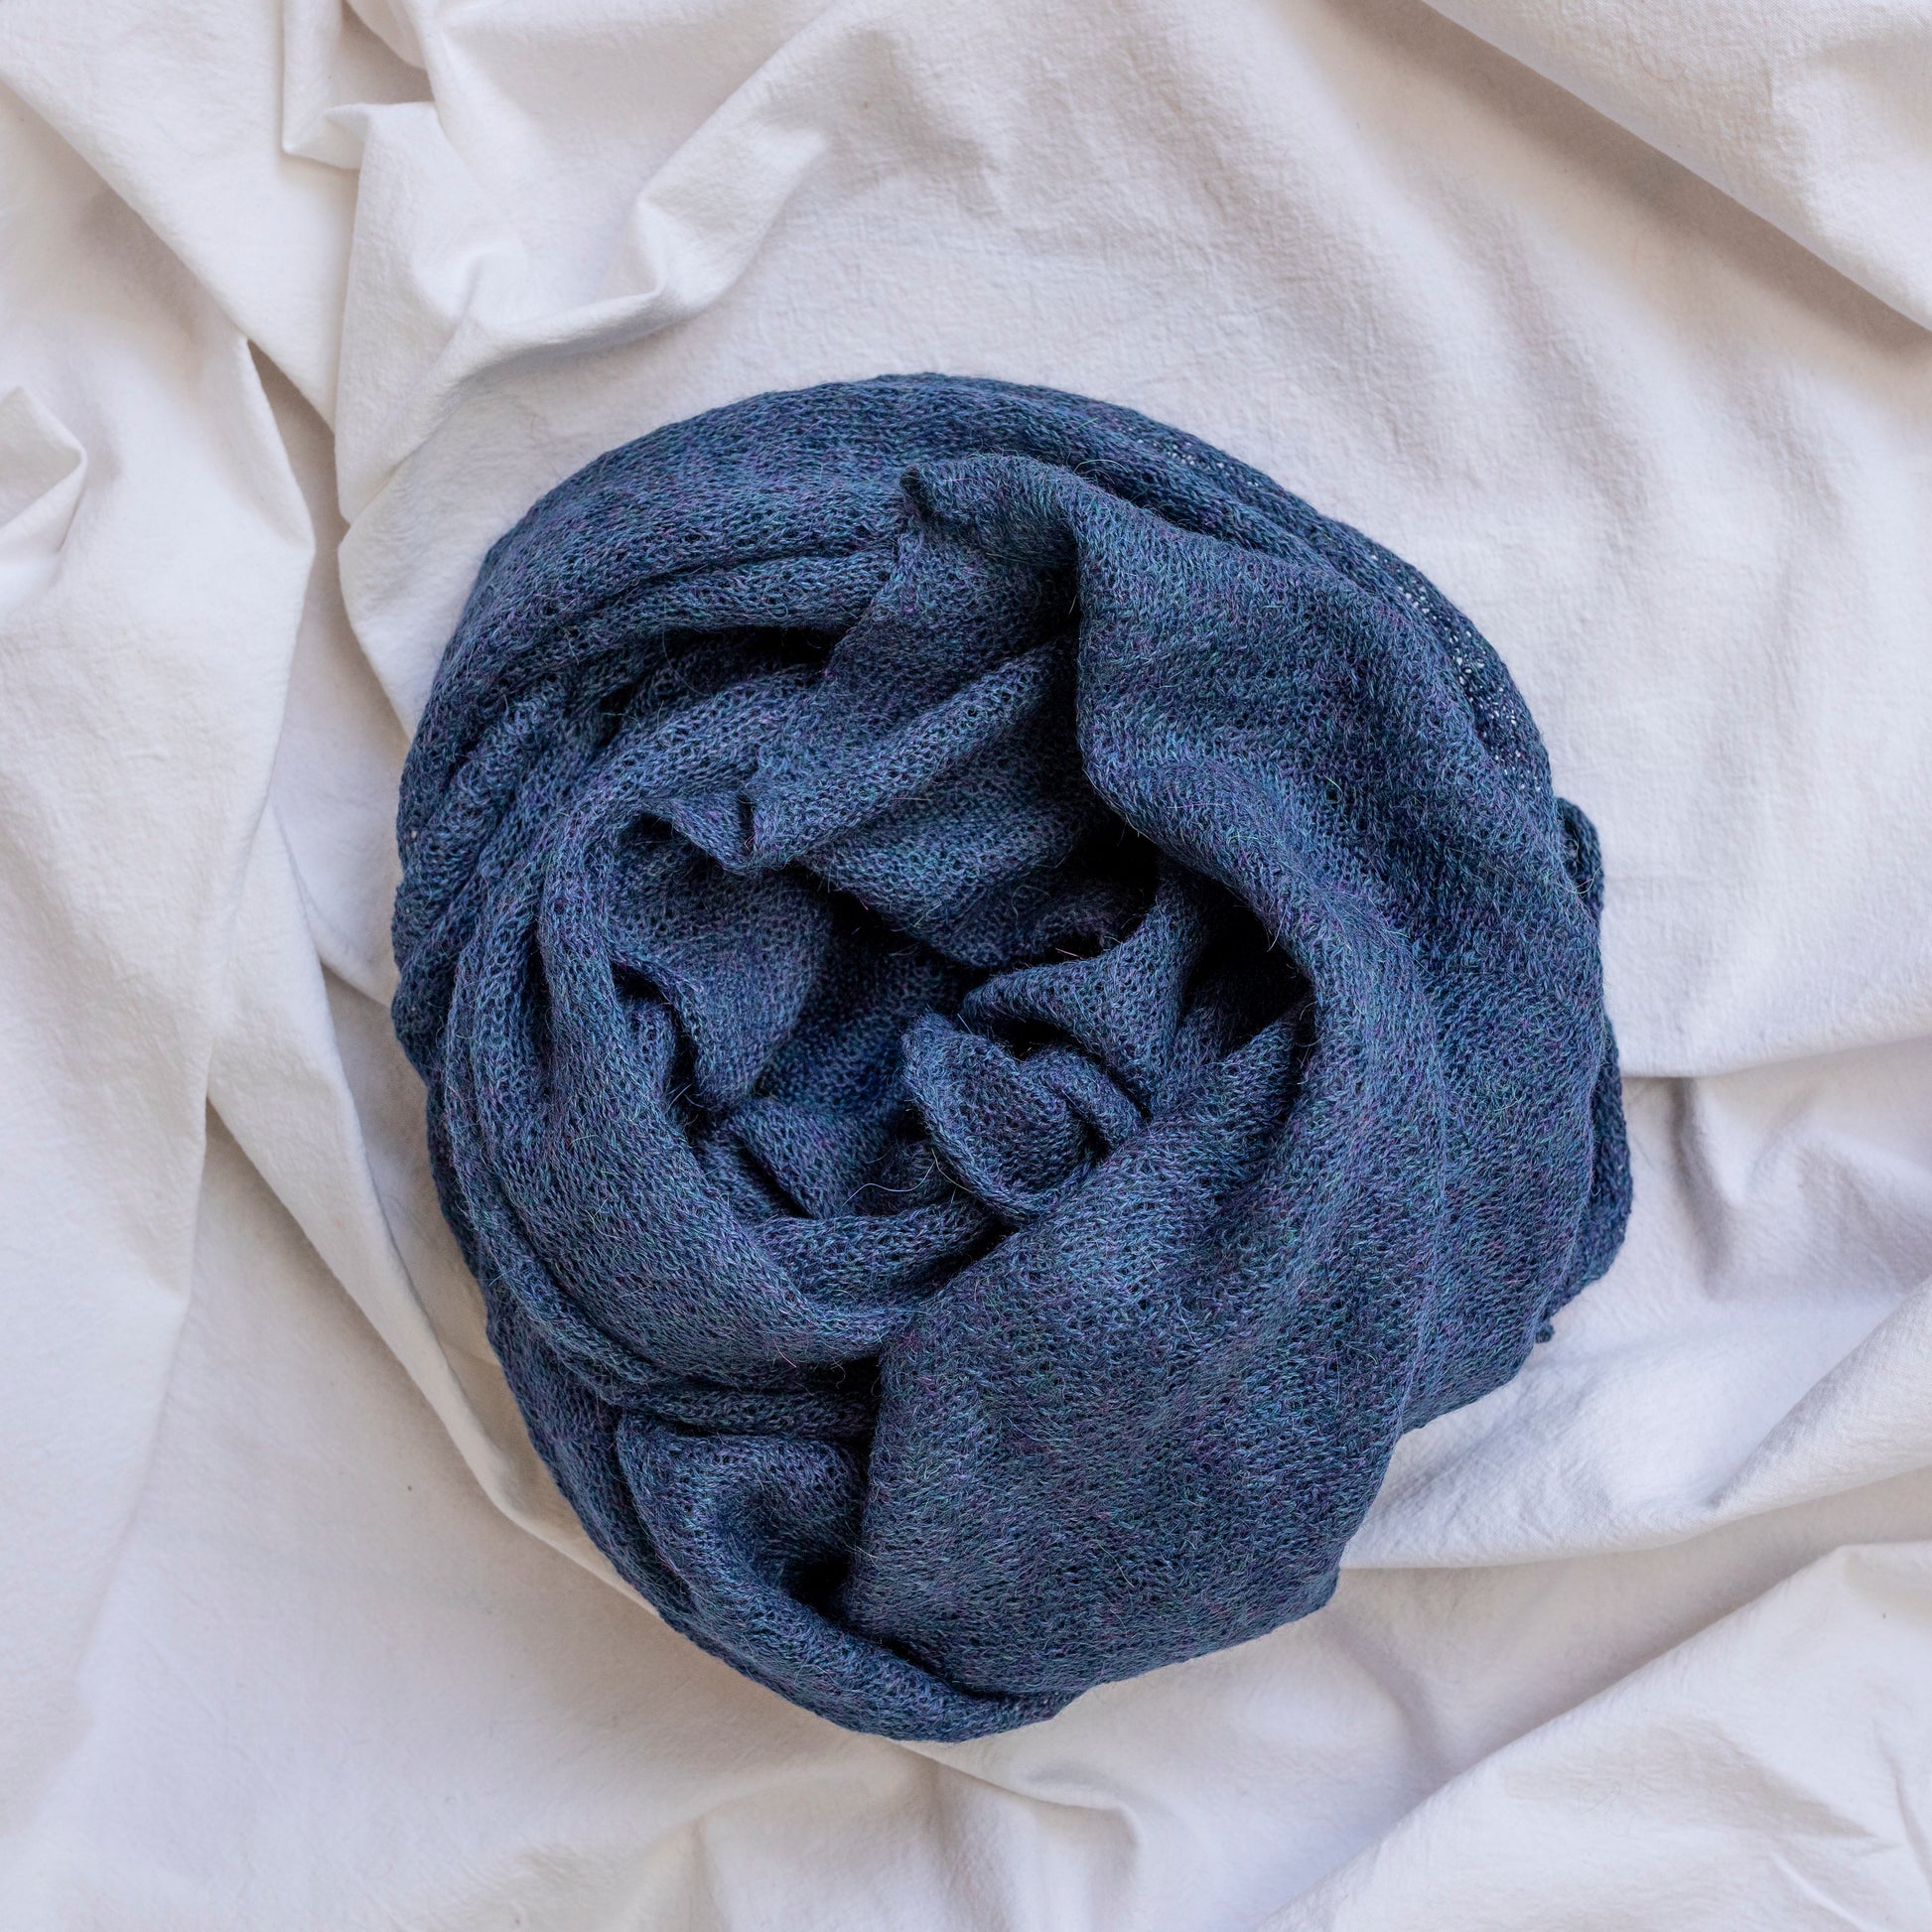 Light blue coloured lightweight and delicately woven scarf. Hand-made by artisans.